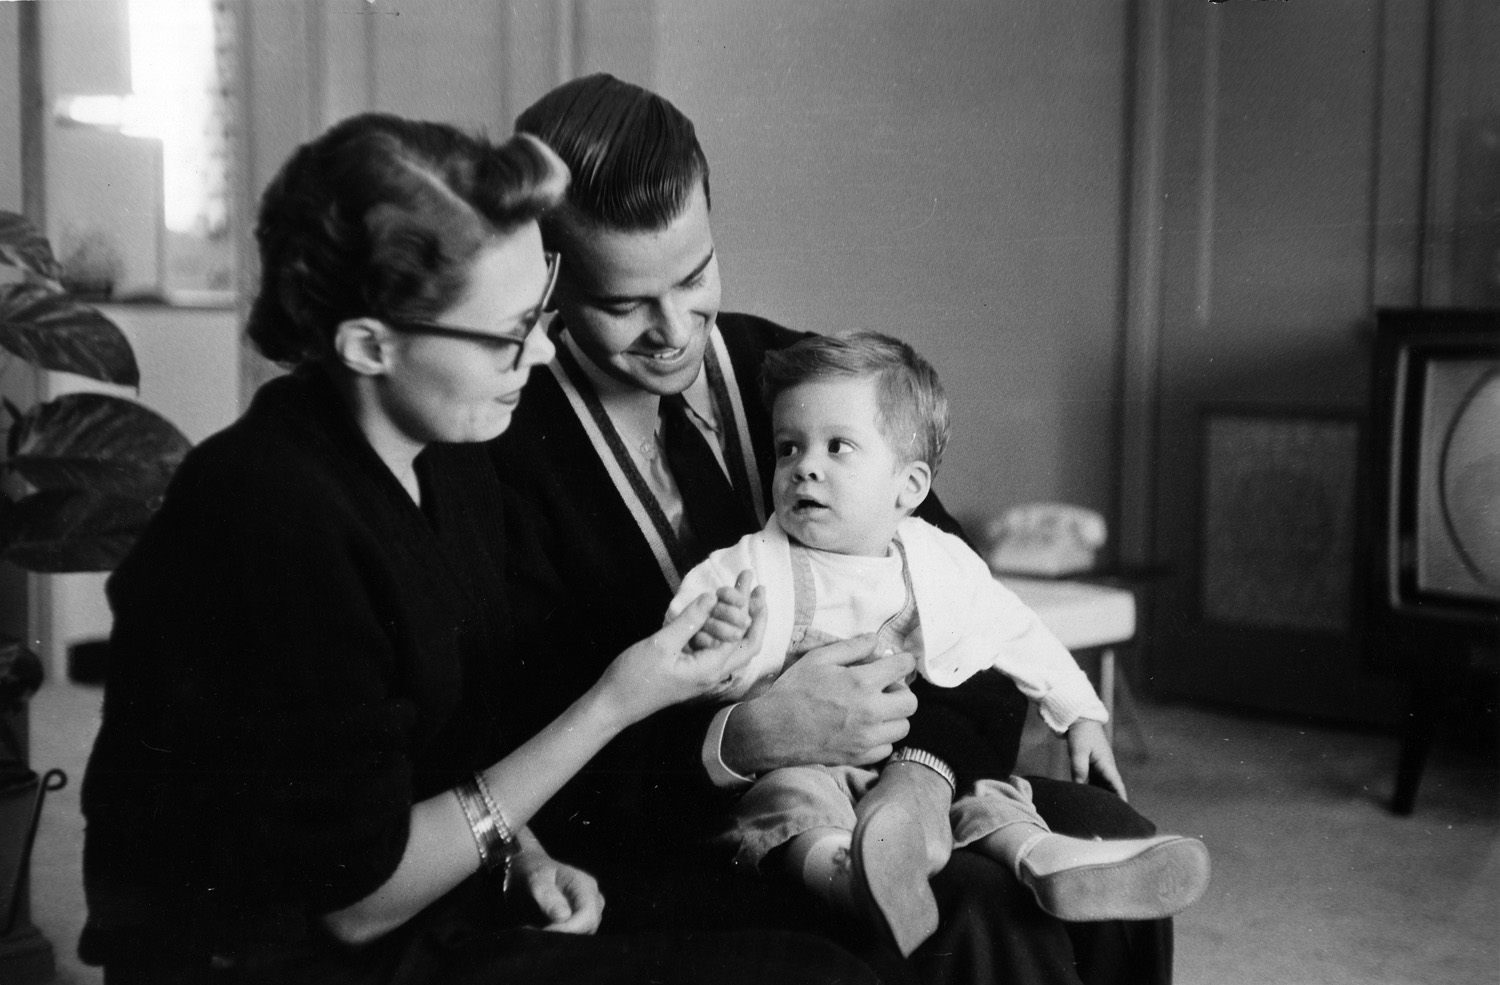 Dick Clark poses for a portrait with his wife Barbara and their son, Richard Clark, Jr., on May 13, 1958, in Philadelphia.